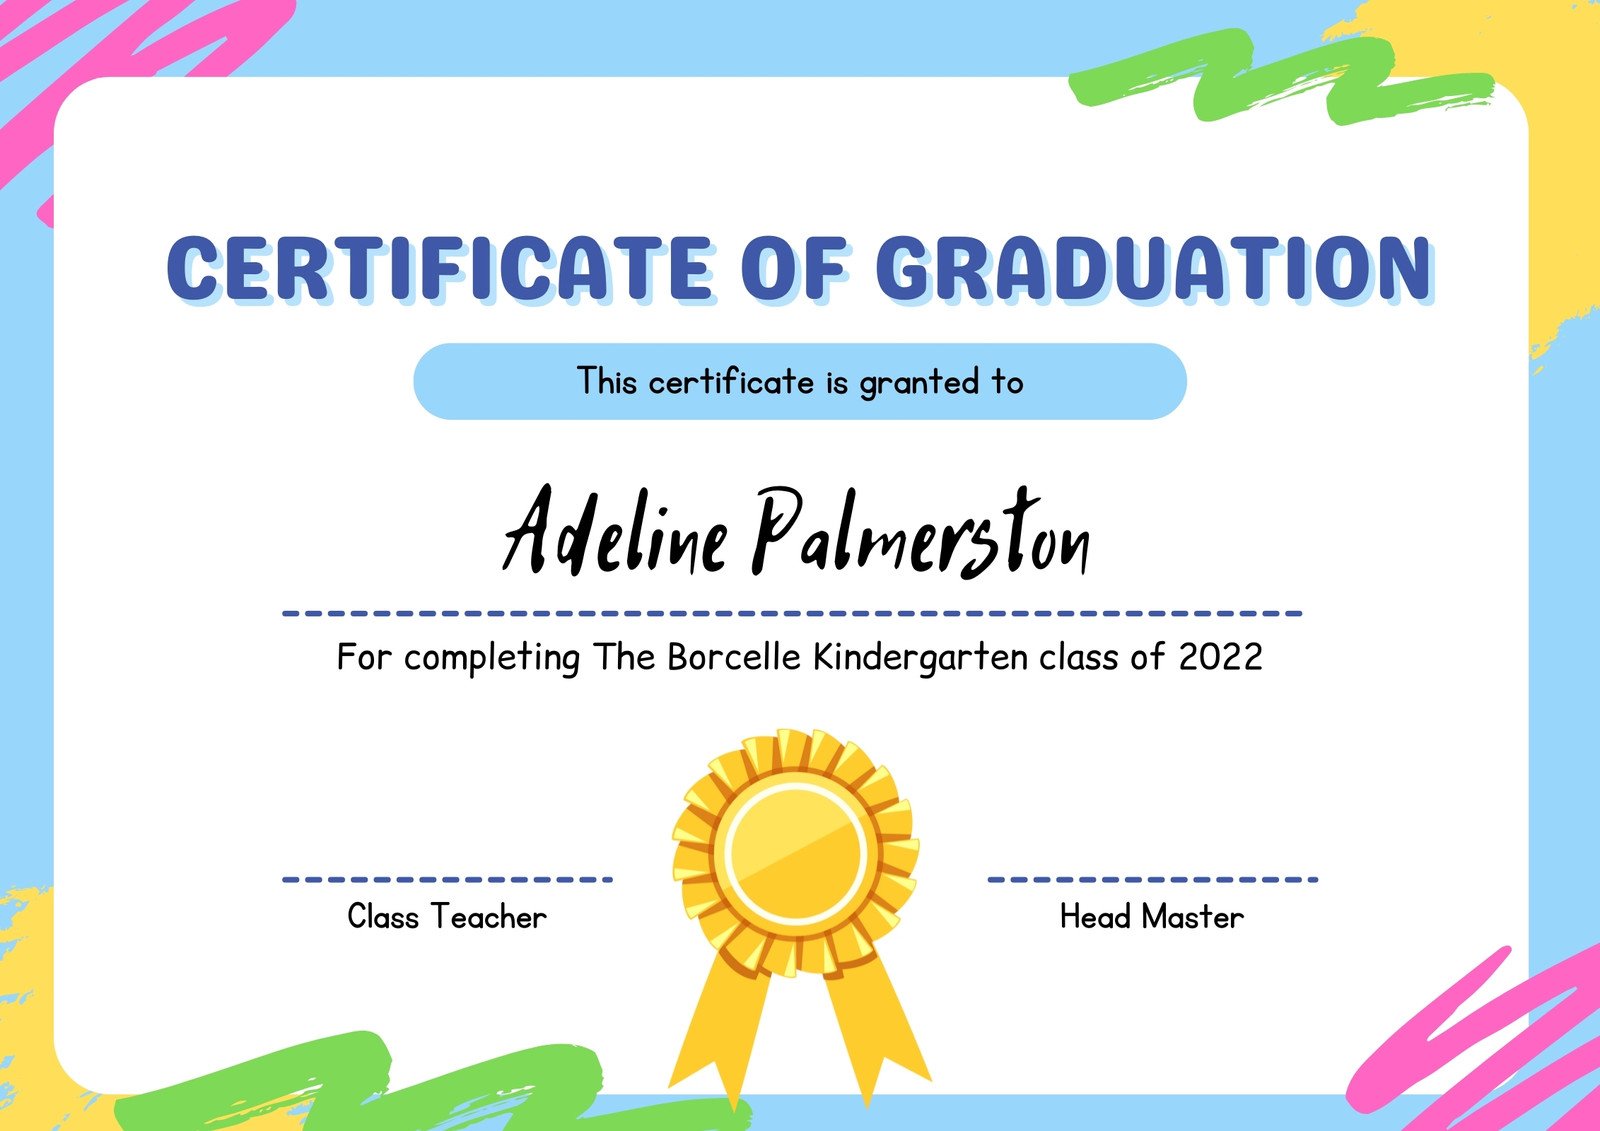 certificate of completion templates for kids